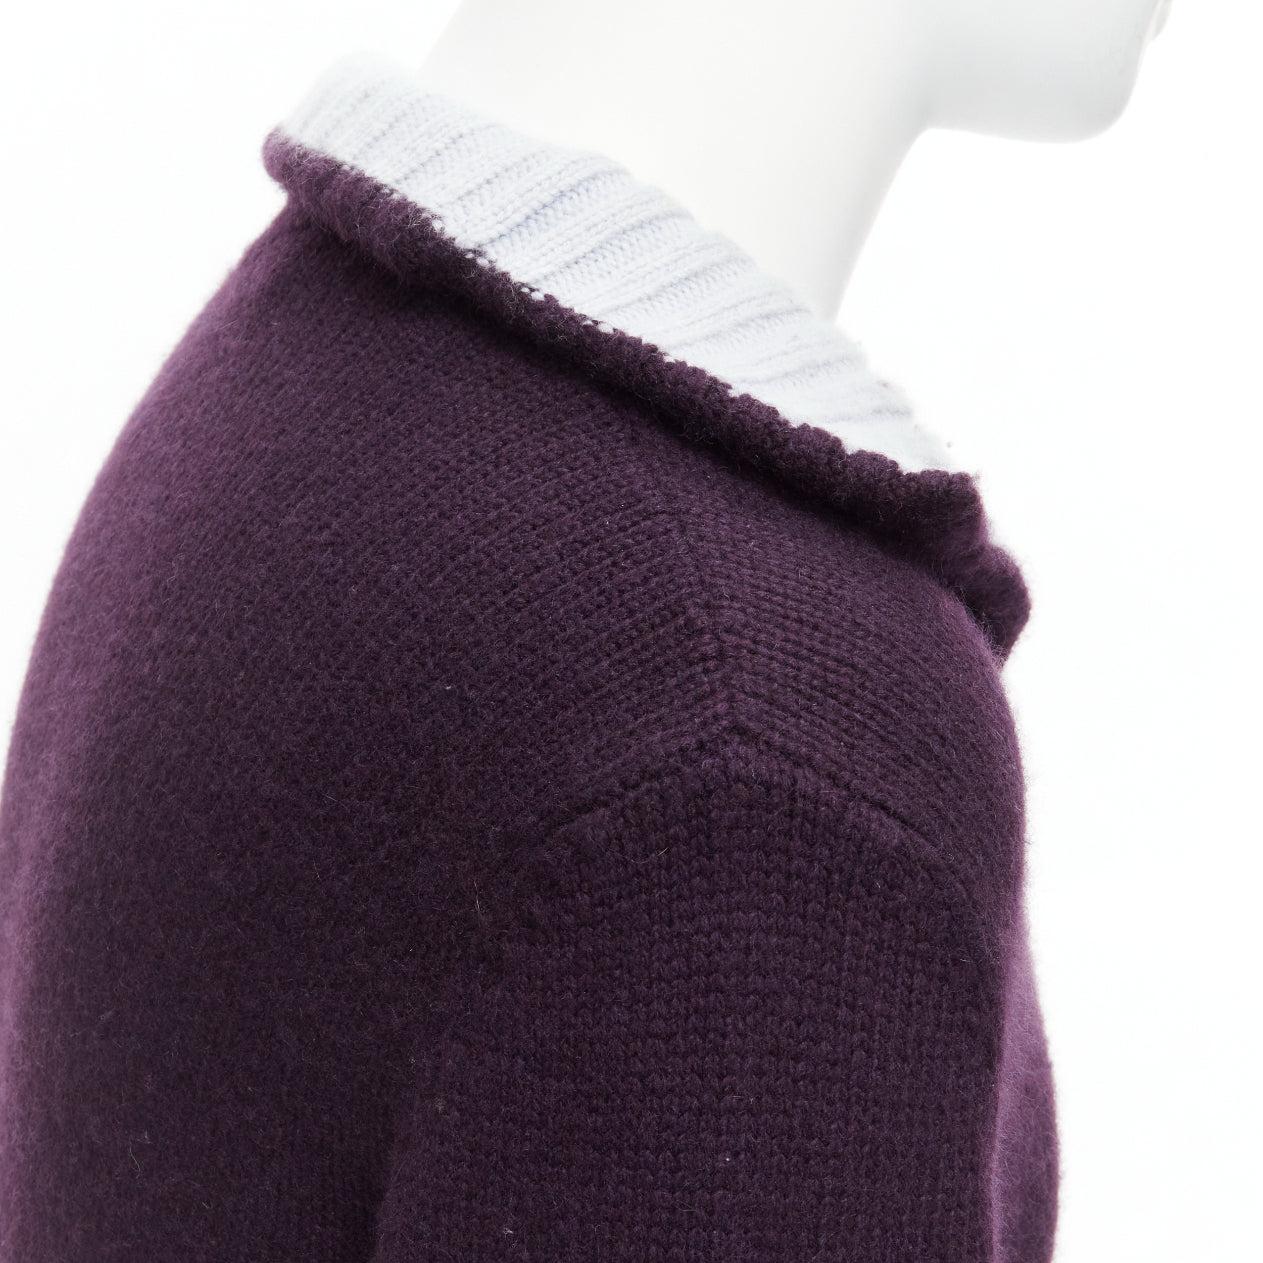 HERMES 100% cashmere dark purple contrasting baby blue collar pullover sweater M For Sale 3